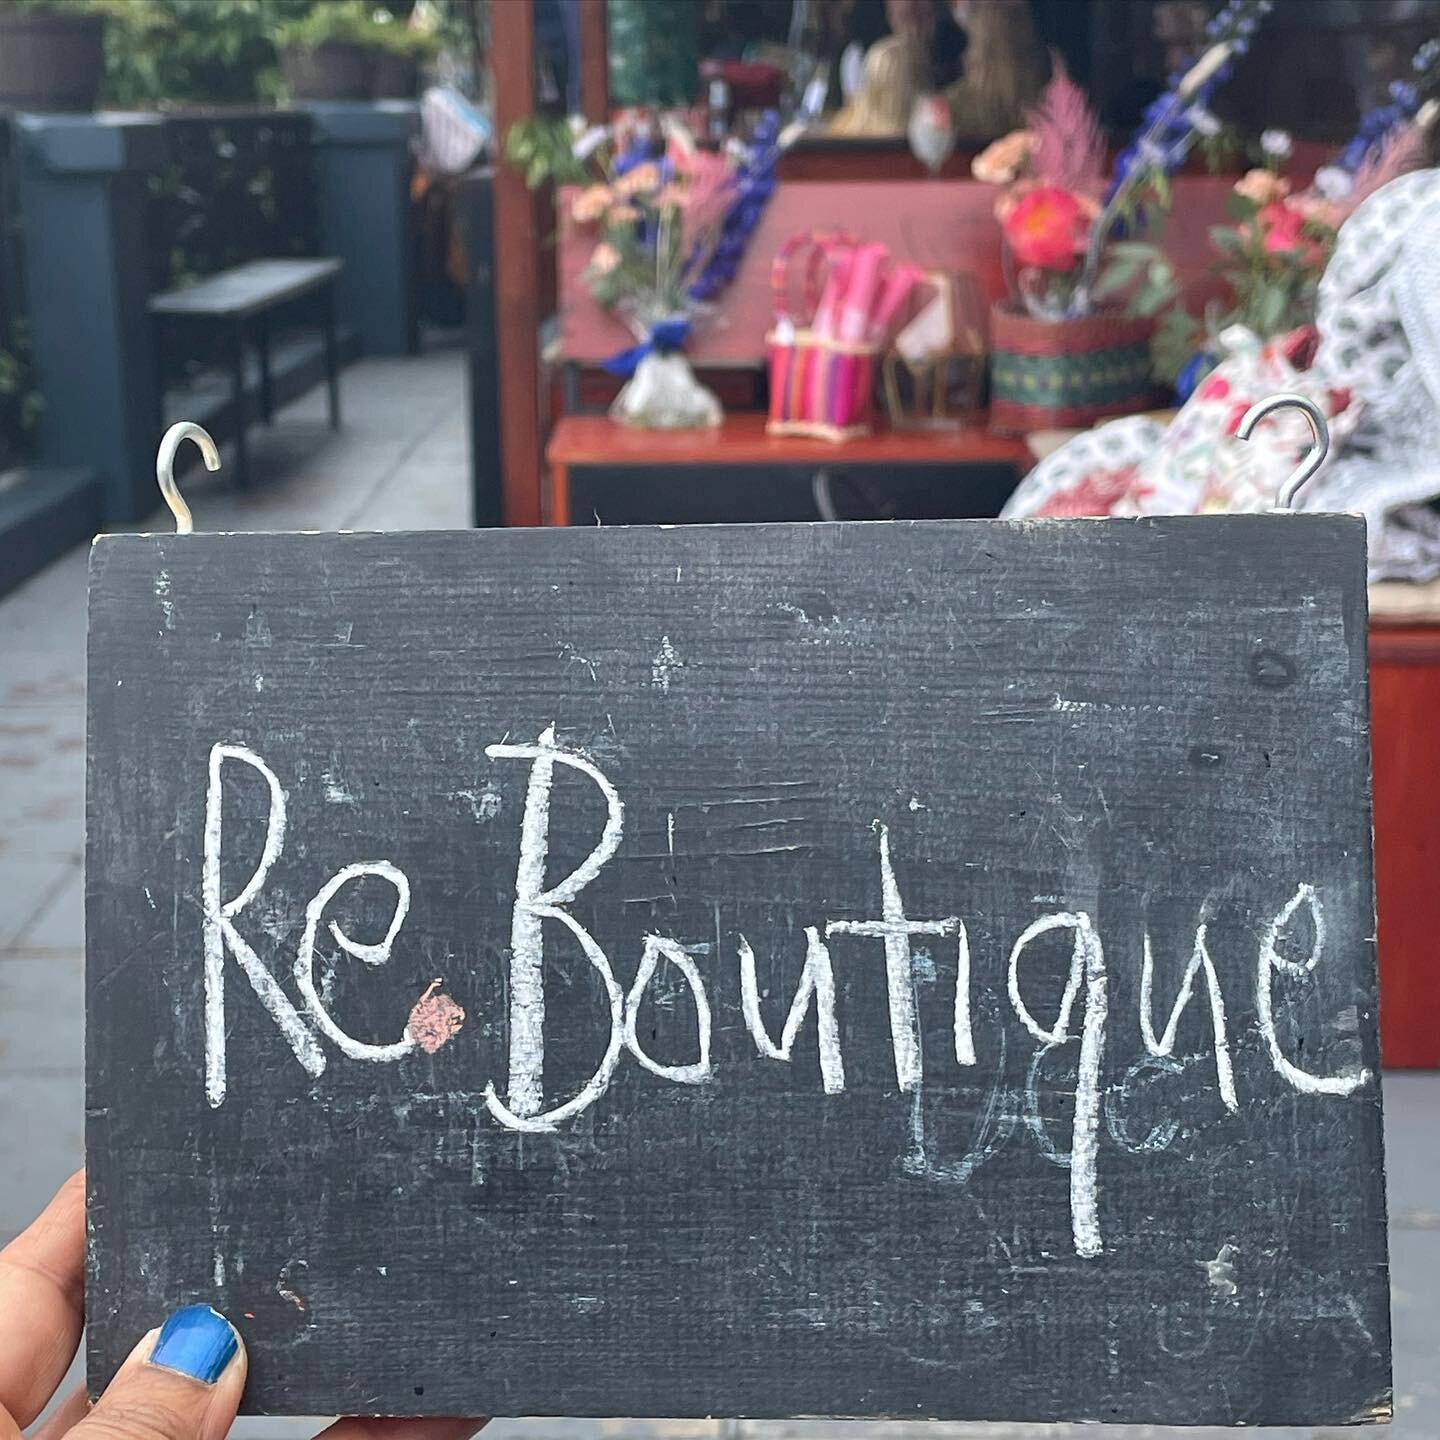 @therocketacton is hosting the @reboutique.co.uk pop up - head down before 4pm for fresh flowers, fashion and homewares. Pop down!